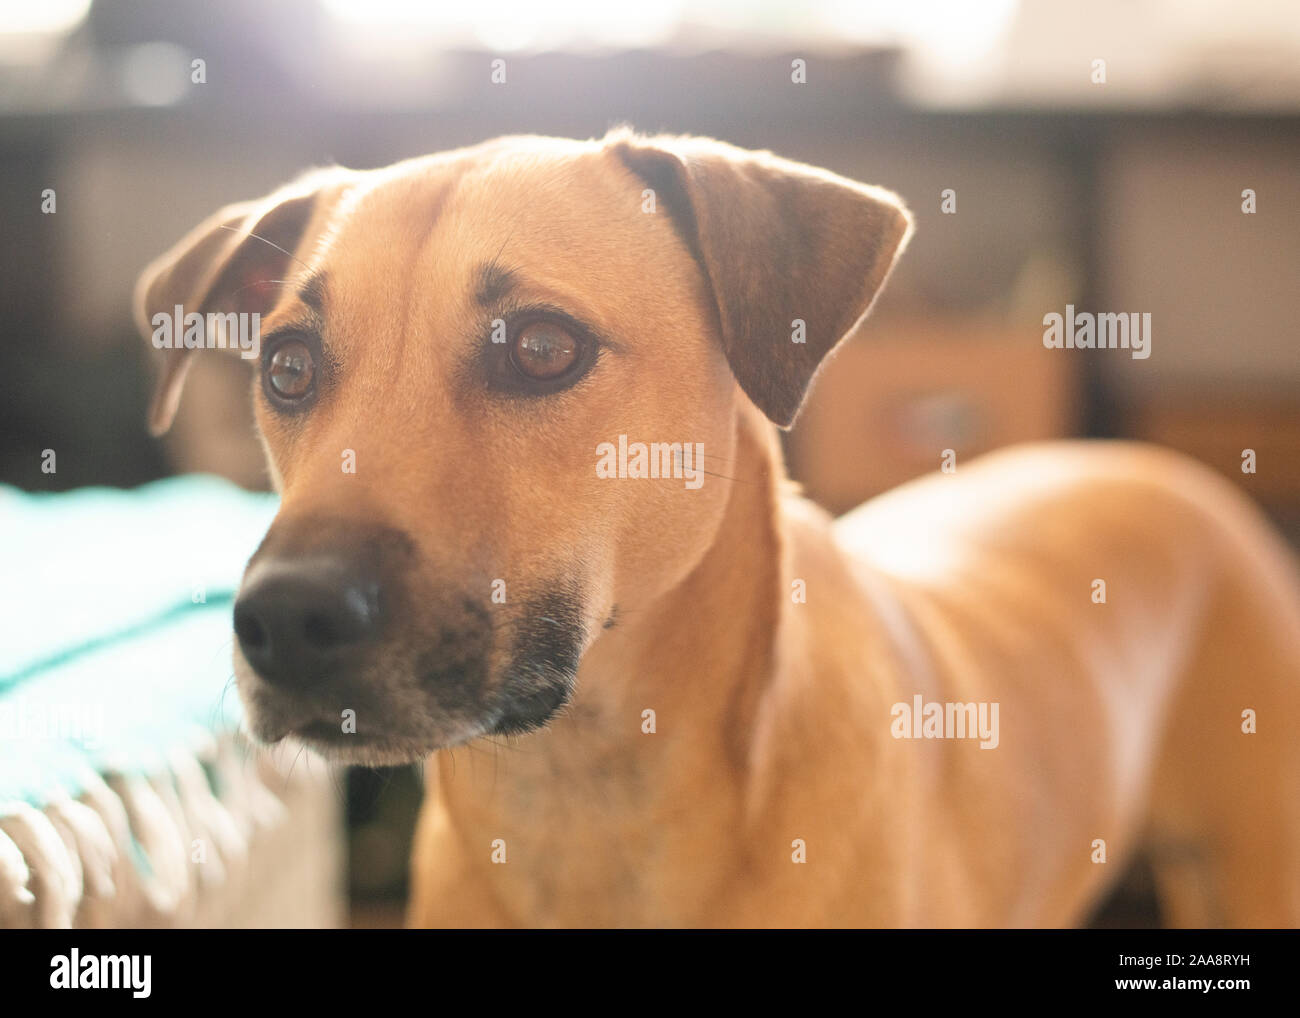 Tan dog with floppy ears and big brown dog eyes Stock Photo